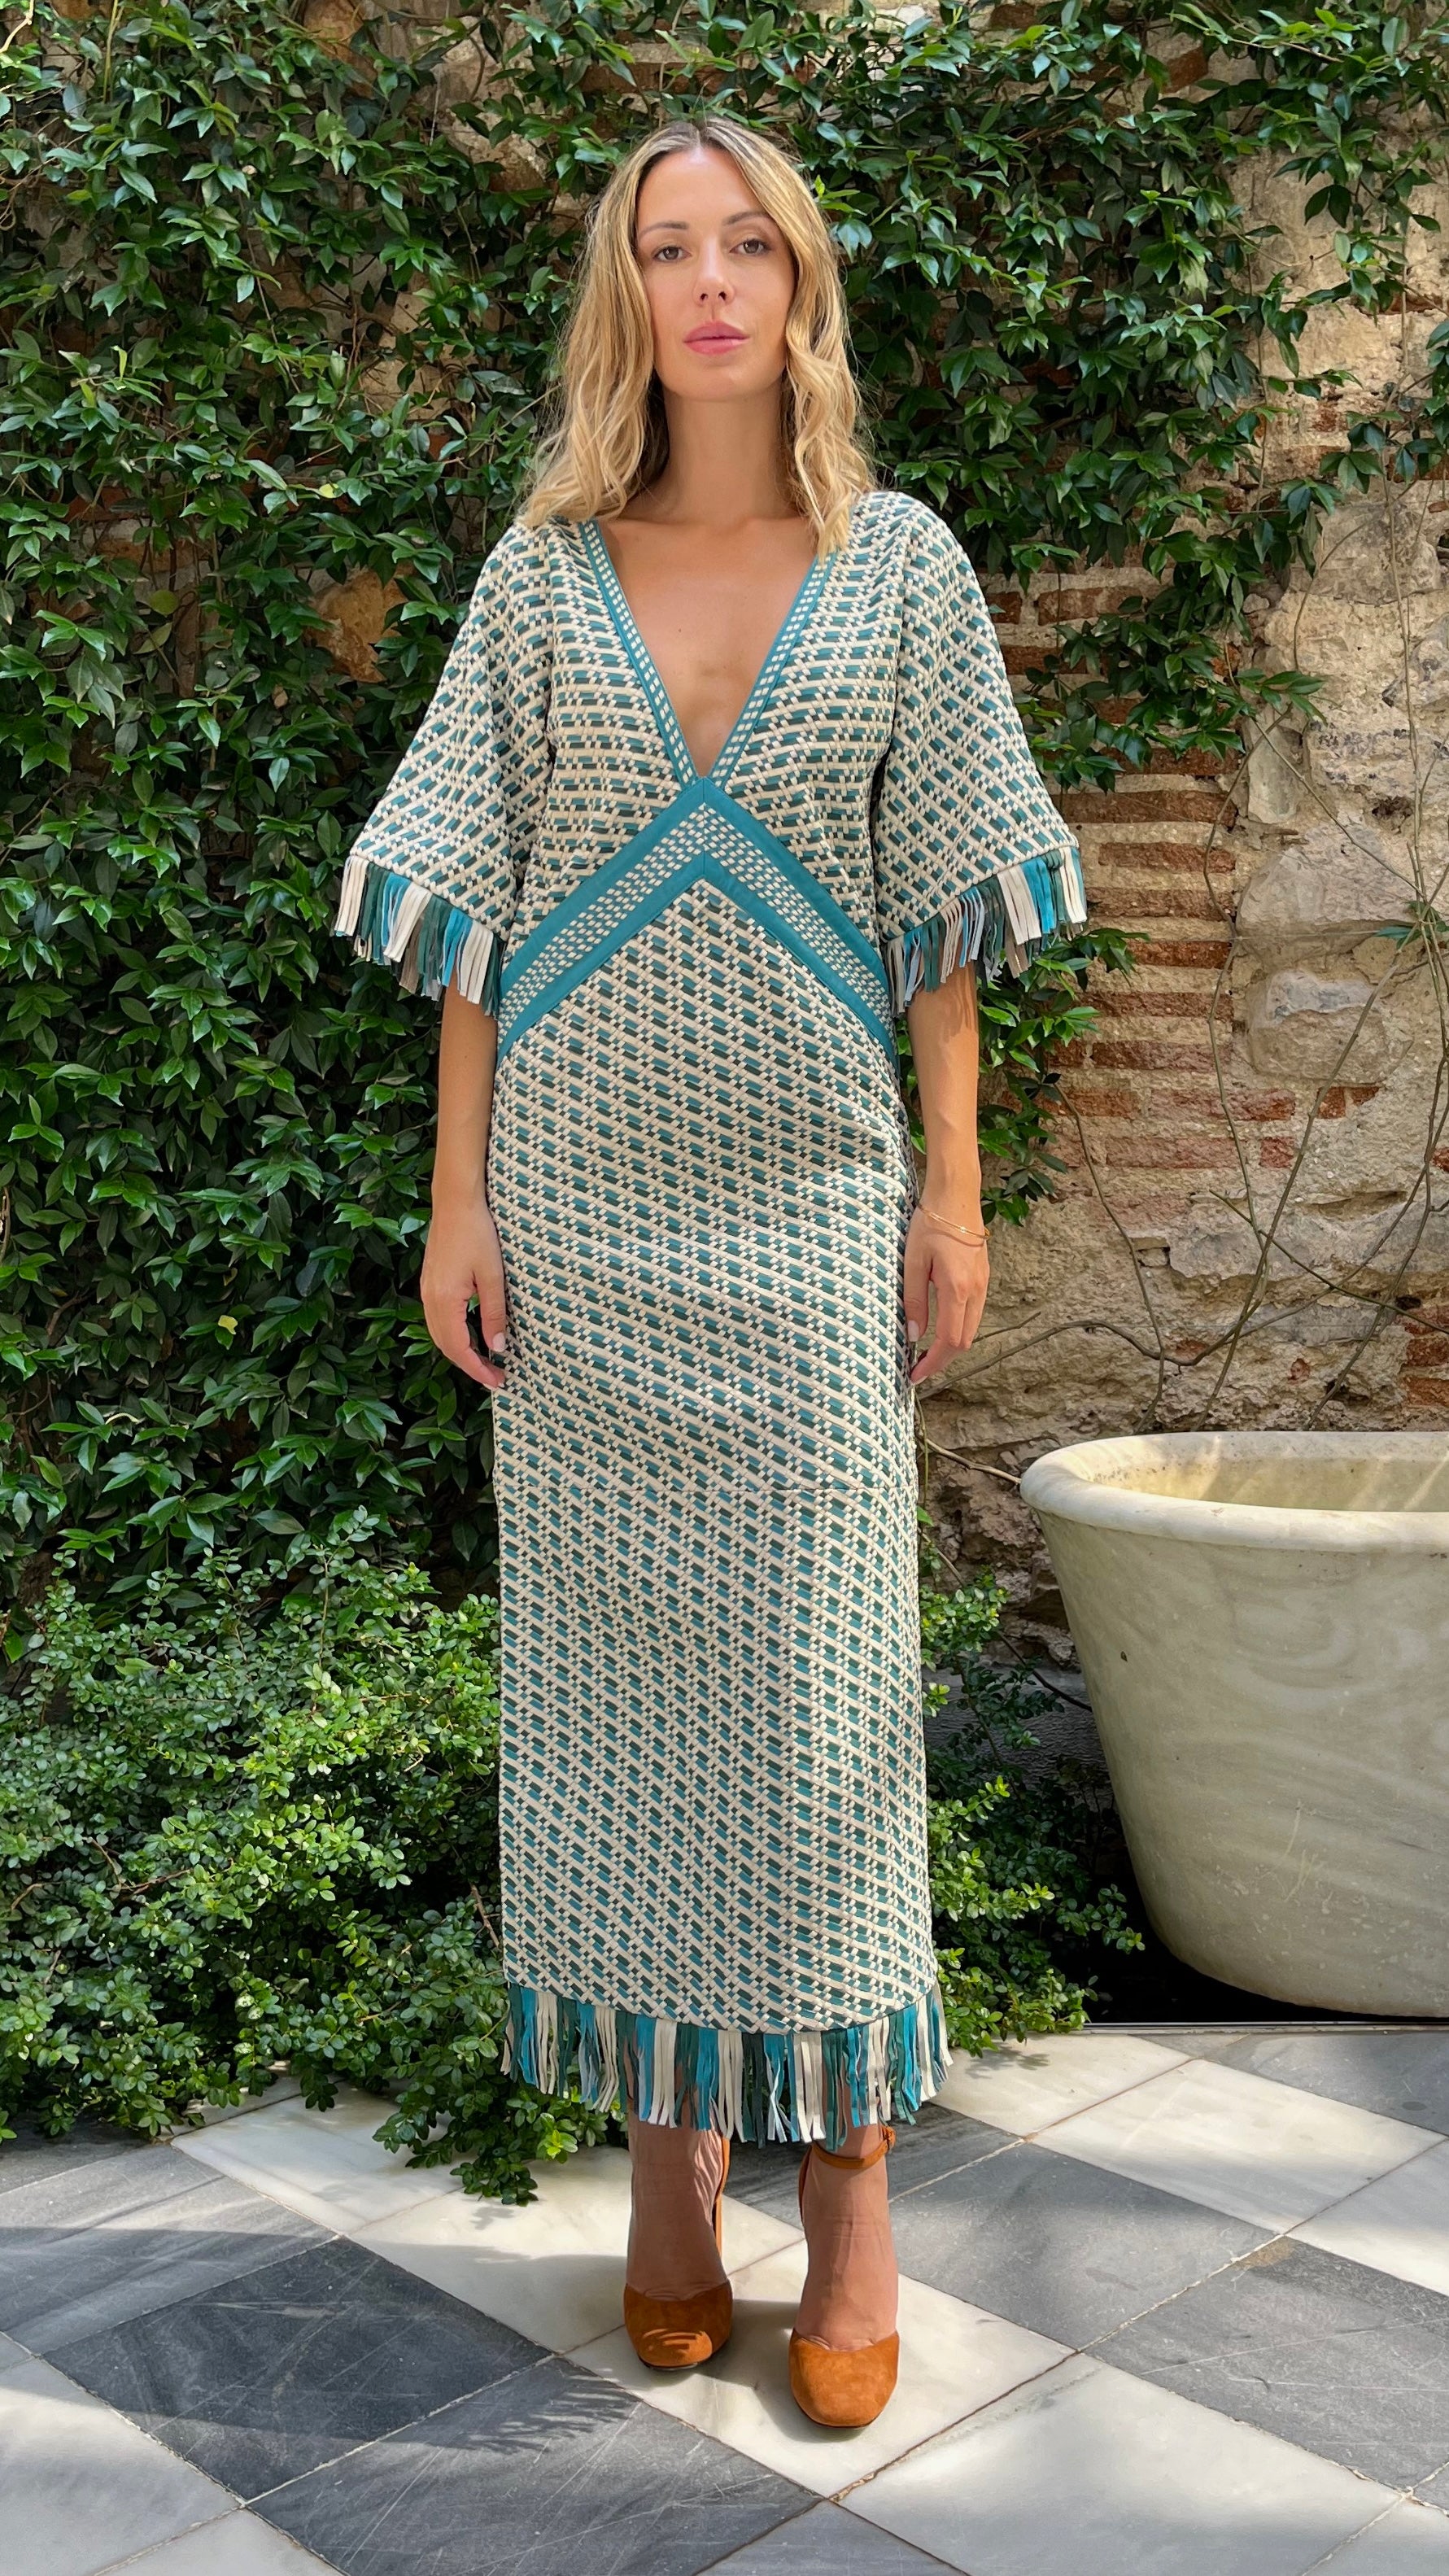 Dodo Bar Or Tor Dress Woven Lamb leather super luxurious dress. Deep v neck in blue green and cream. Slightly open v back. Midi length dress. Leather fringe detail. New collection Pre Fall experience 27. Shown in model front view.